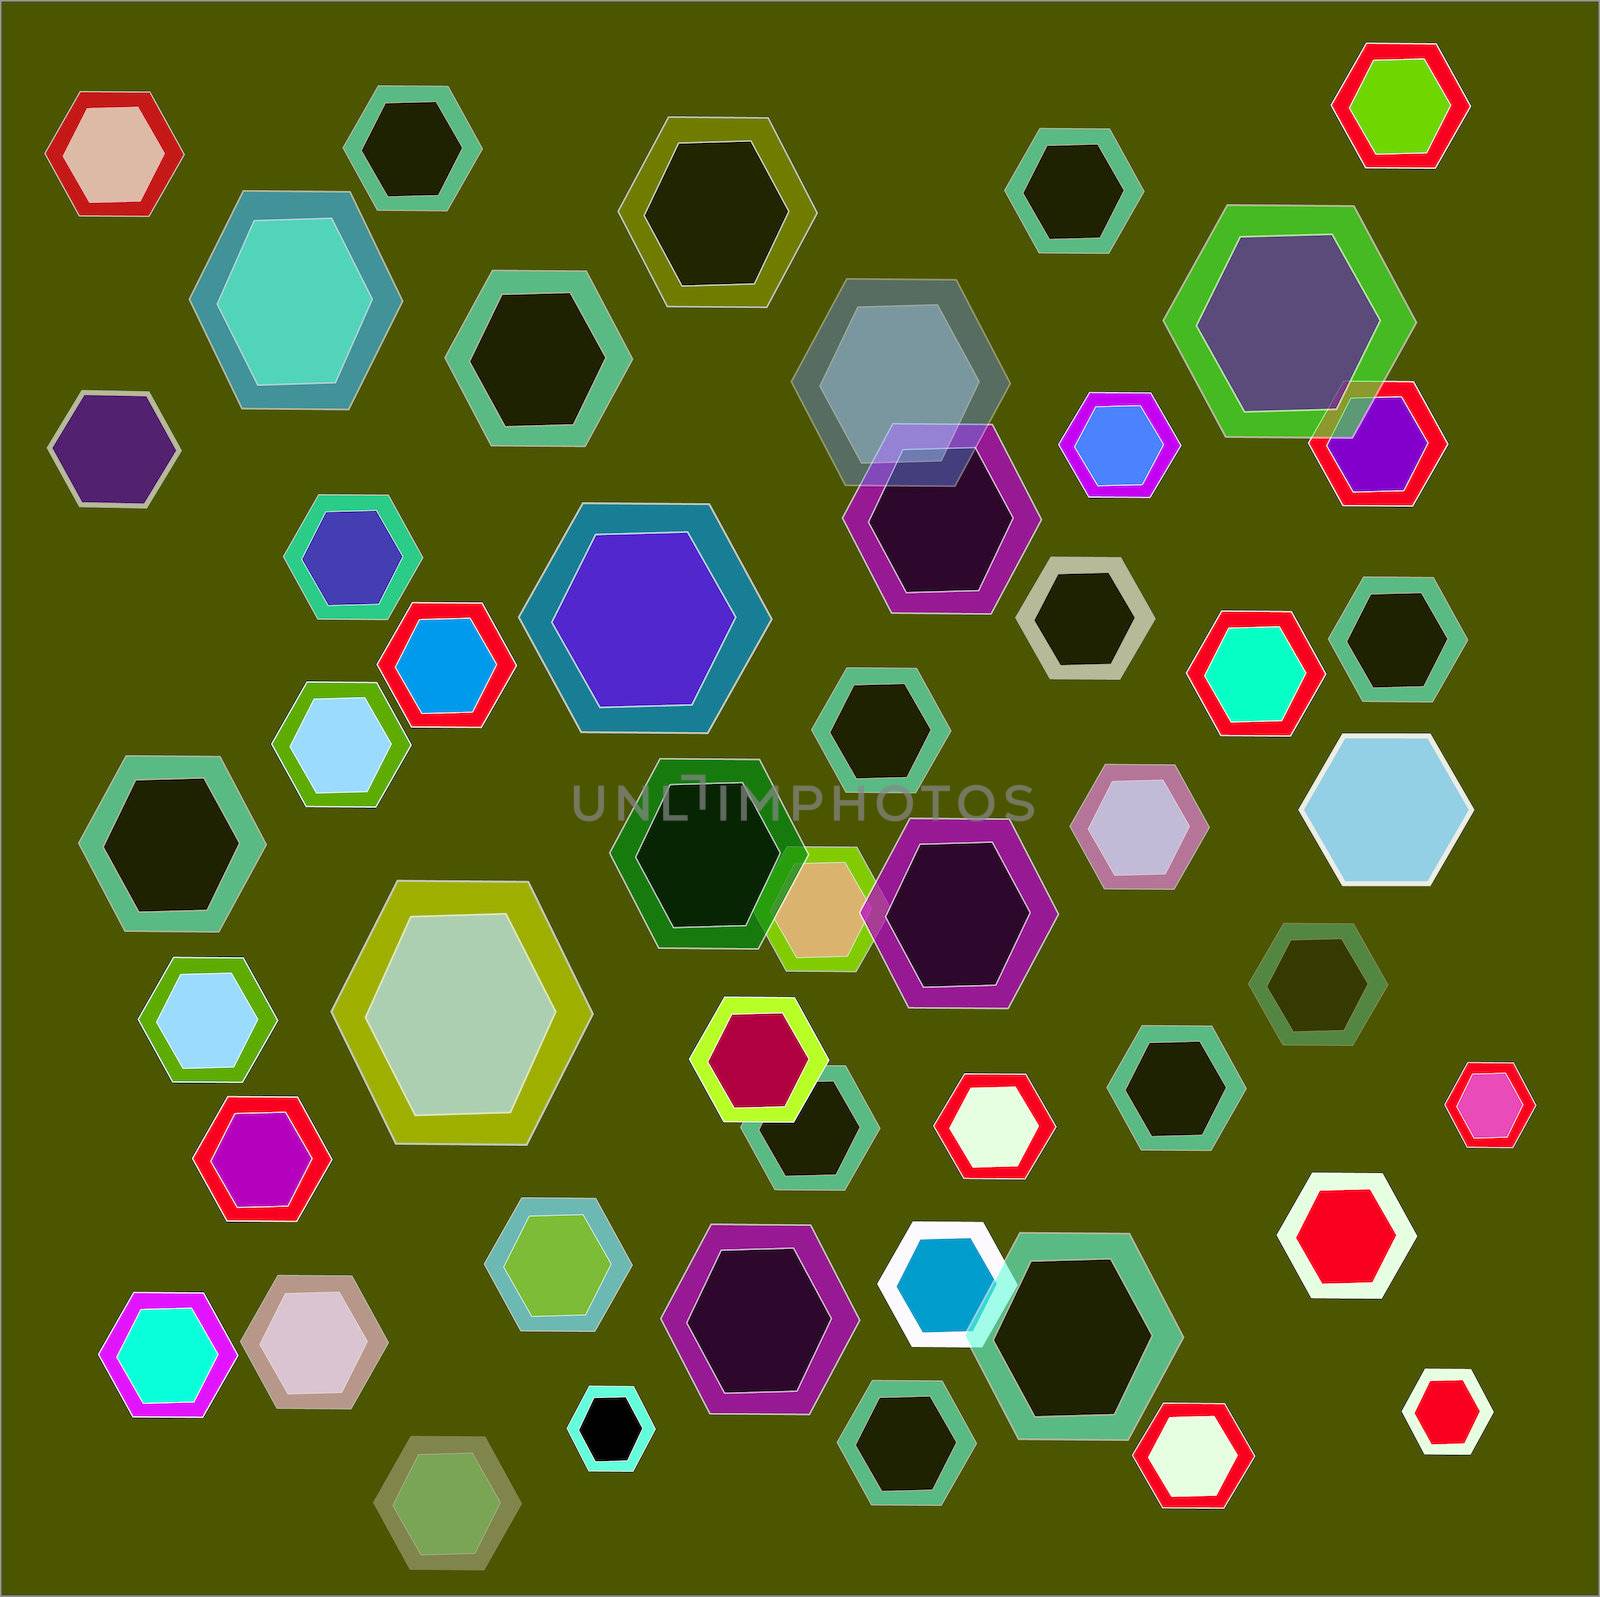 abstract geometrical background